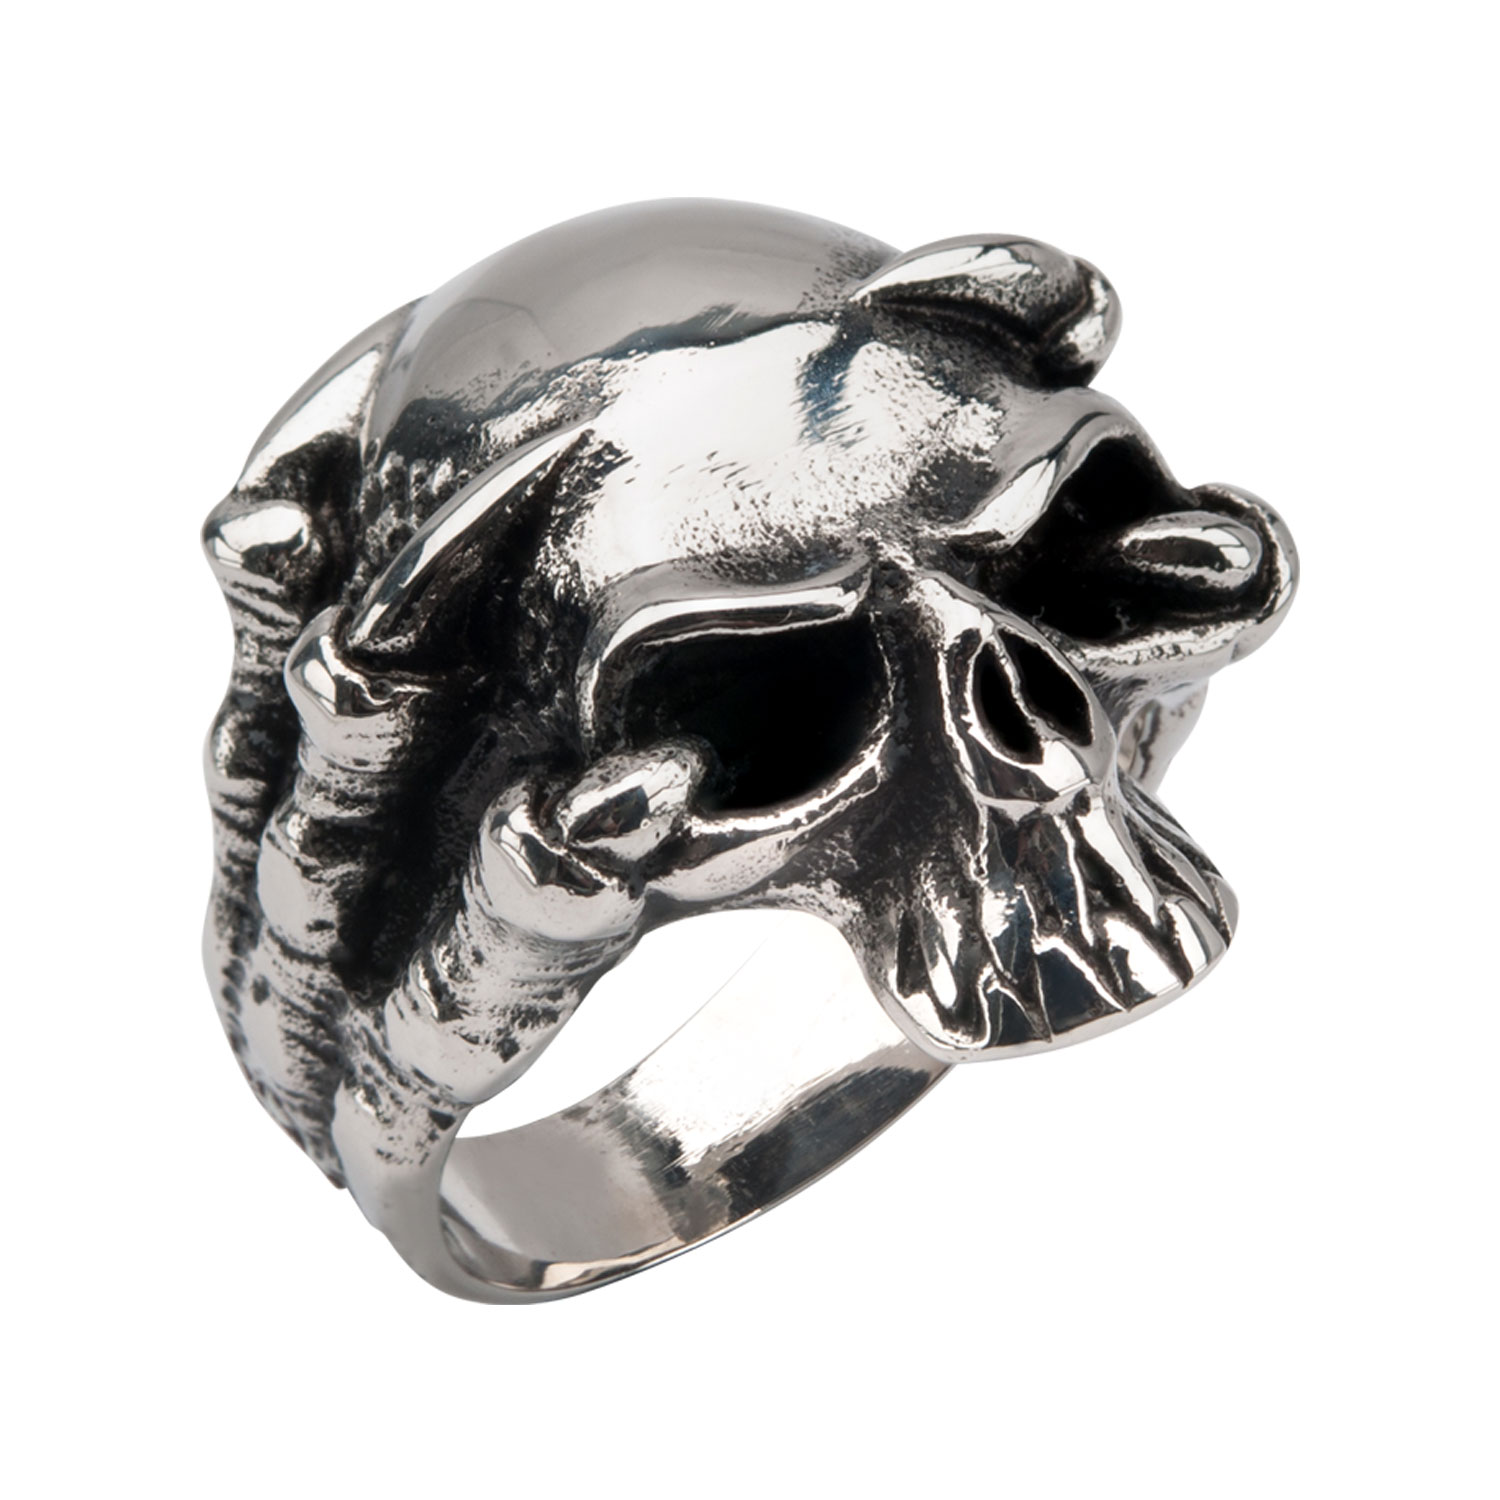 Black Oxidized Skull Ring with Claws Ken Walker Jewelers Gig Harbor, WA